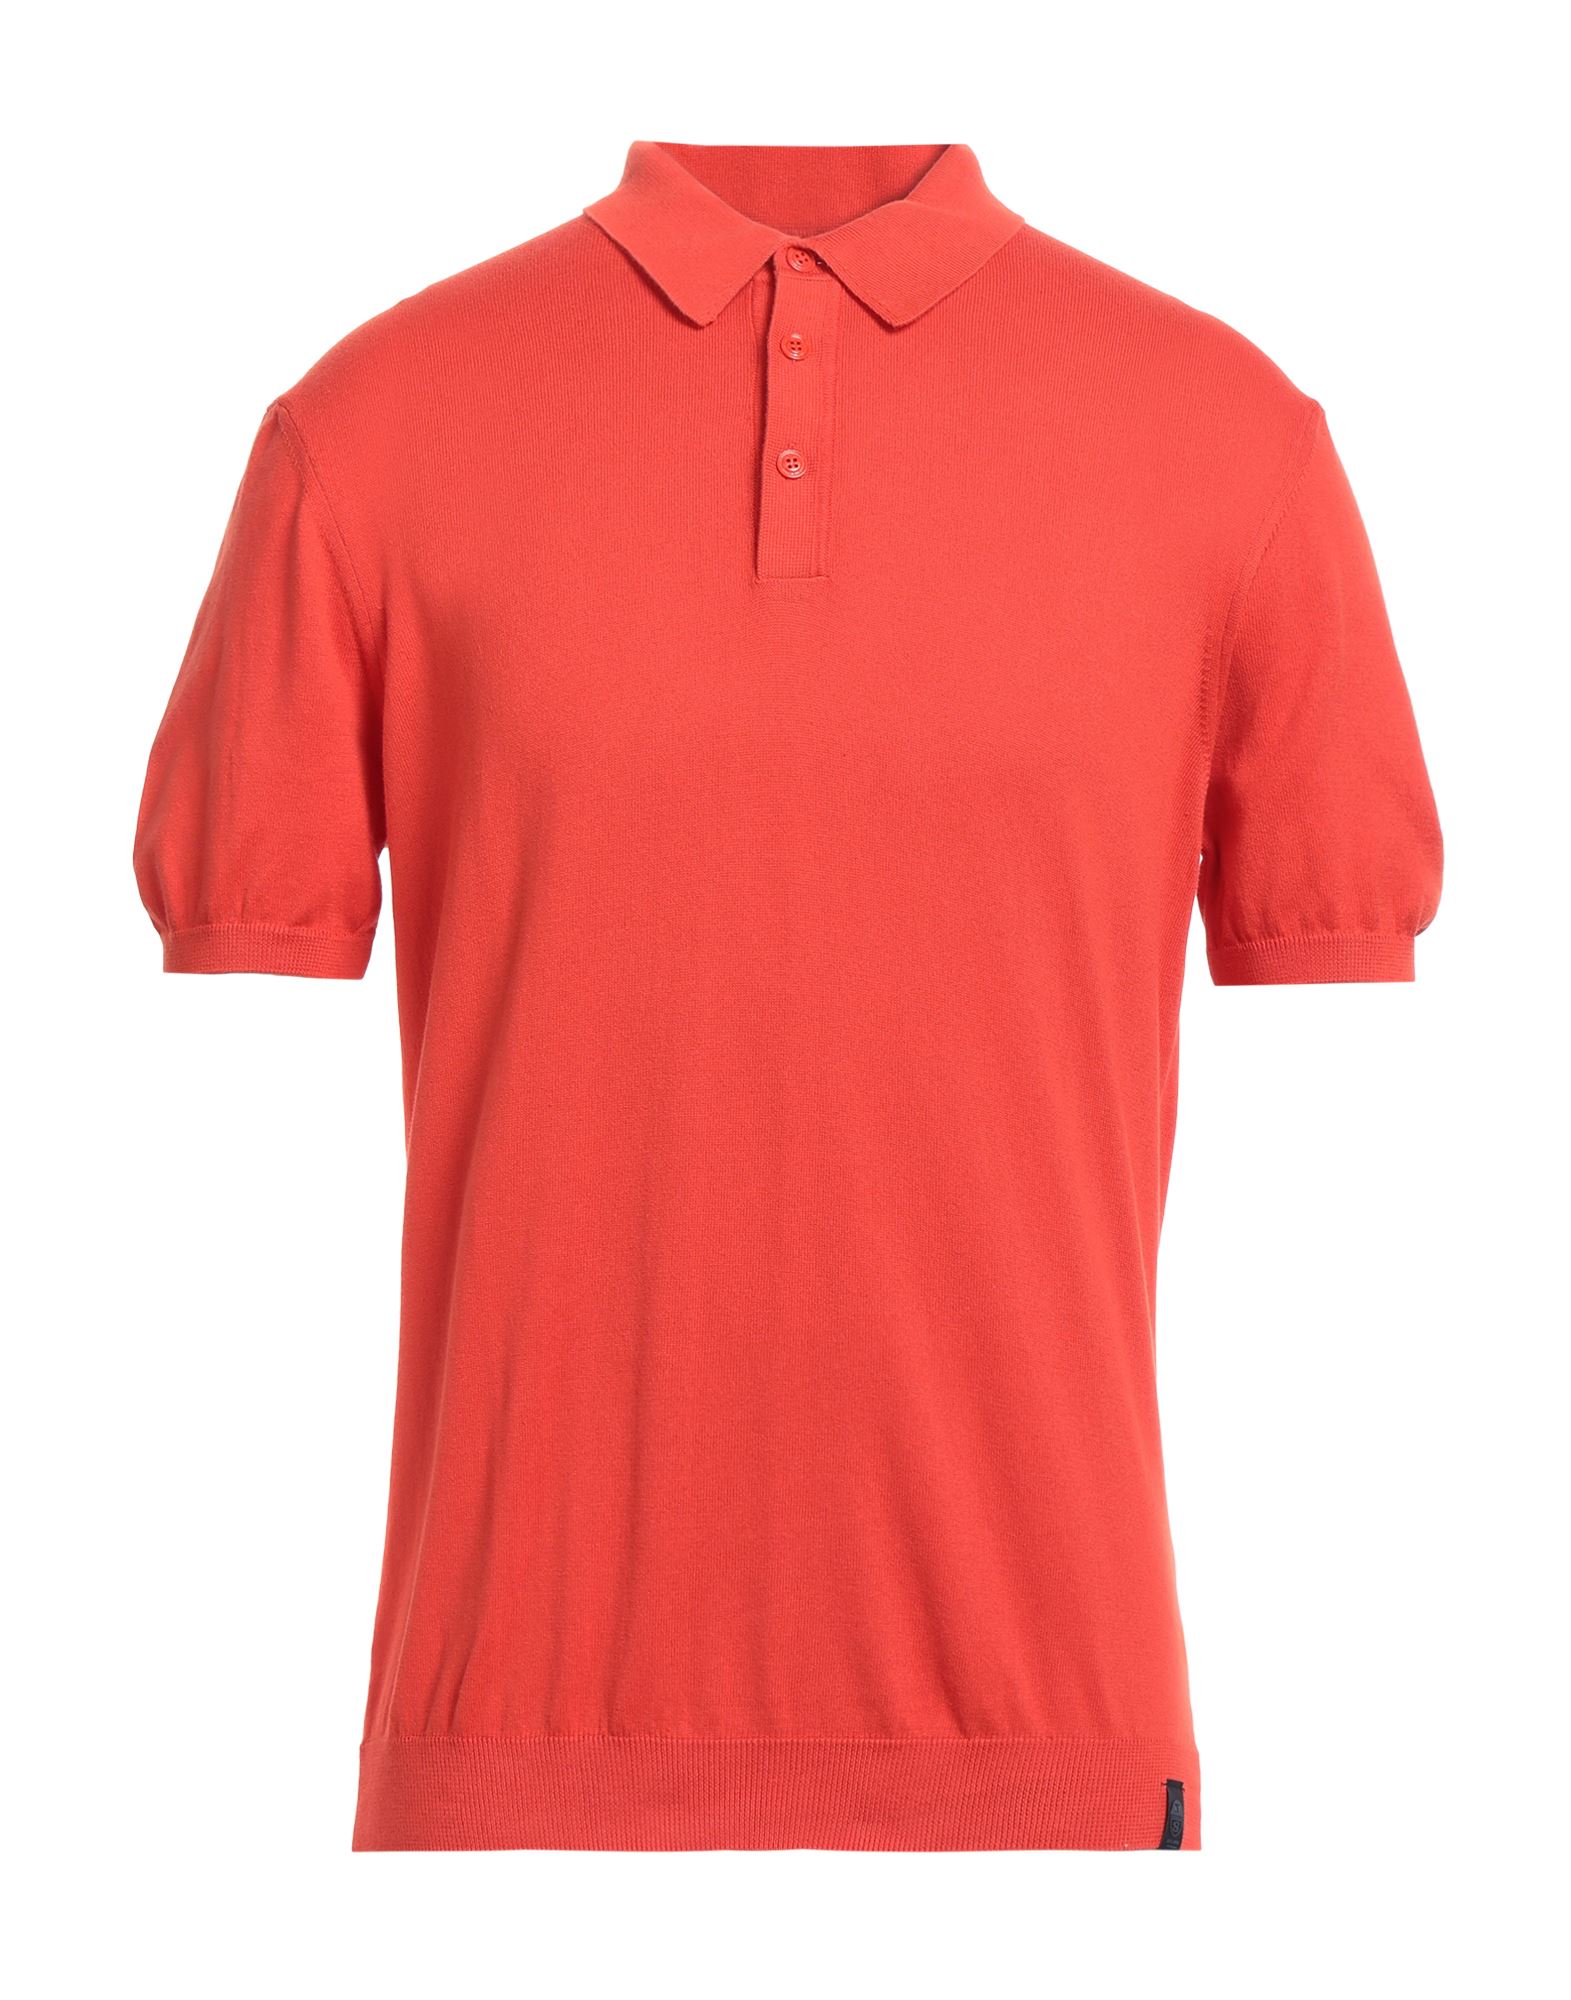 North Sails Polo Shirts In Tomato Red